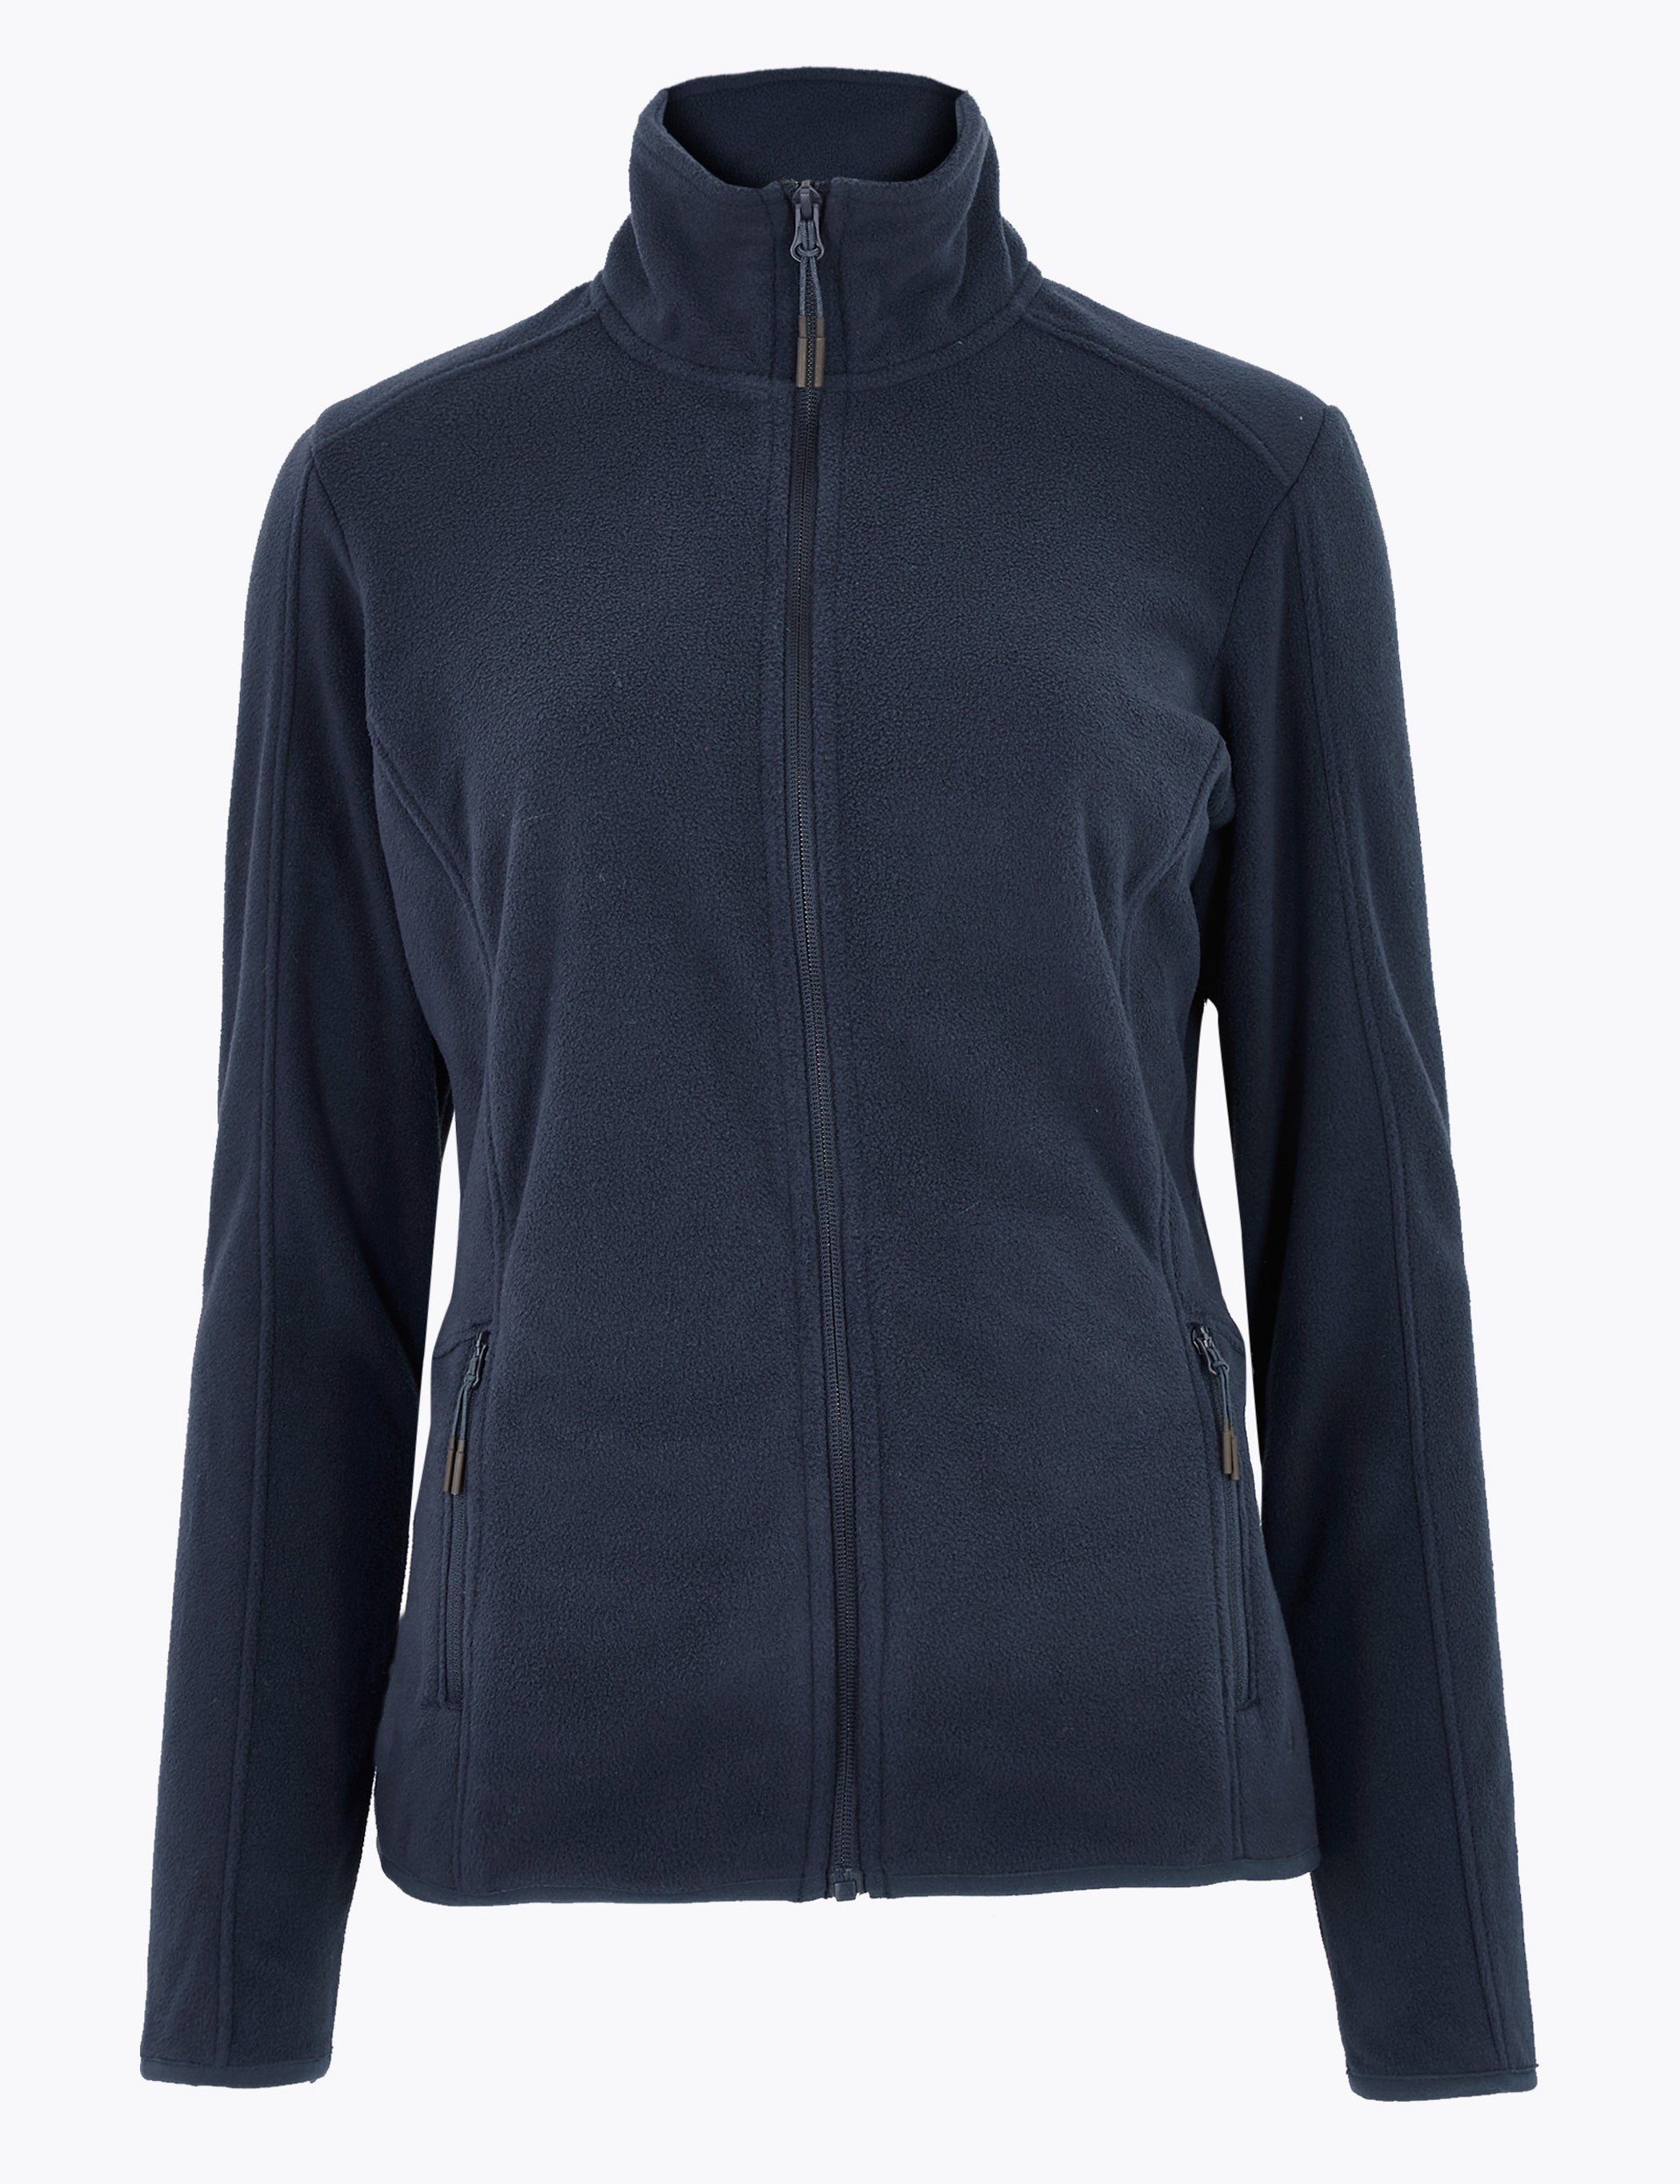 Normcore No More: This Season's Best Fleeces Will Help You Stand